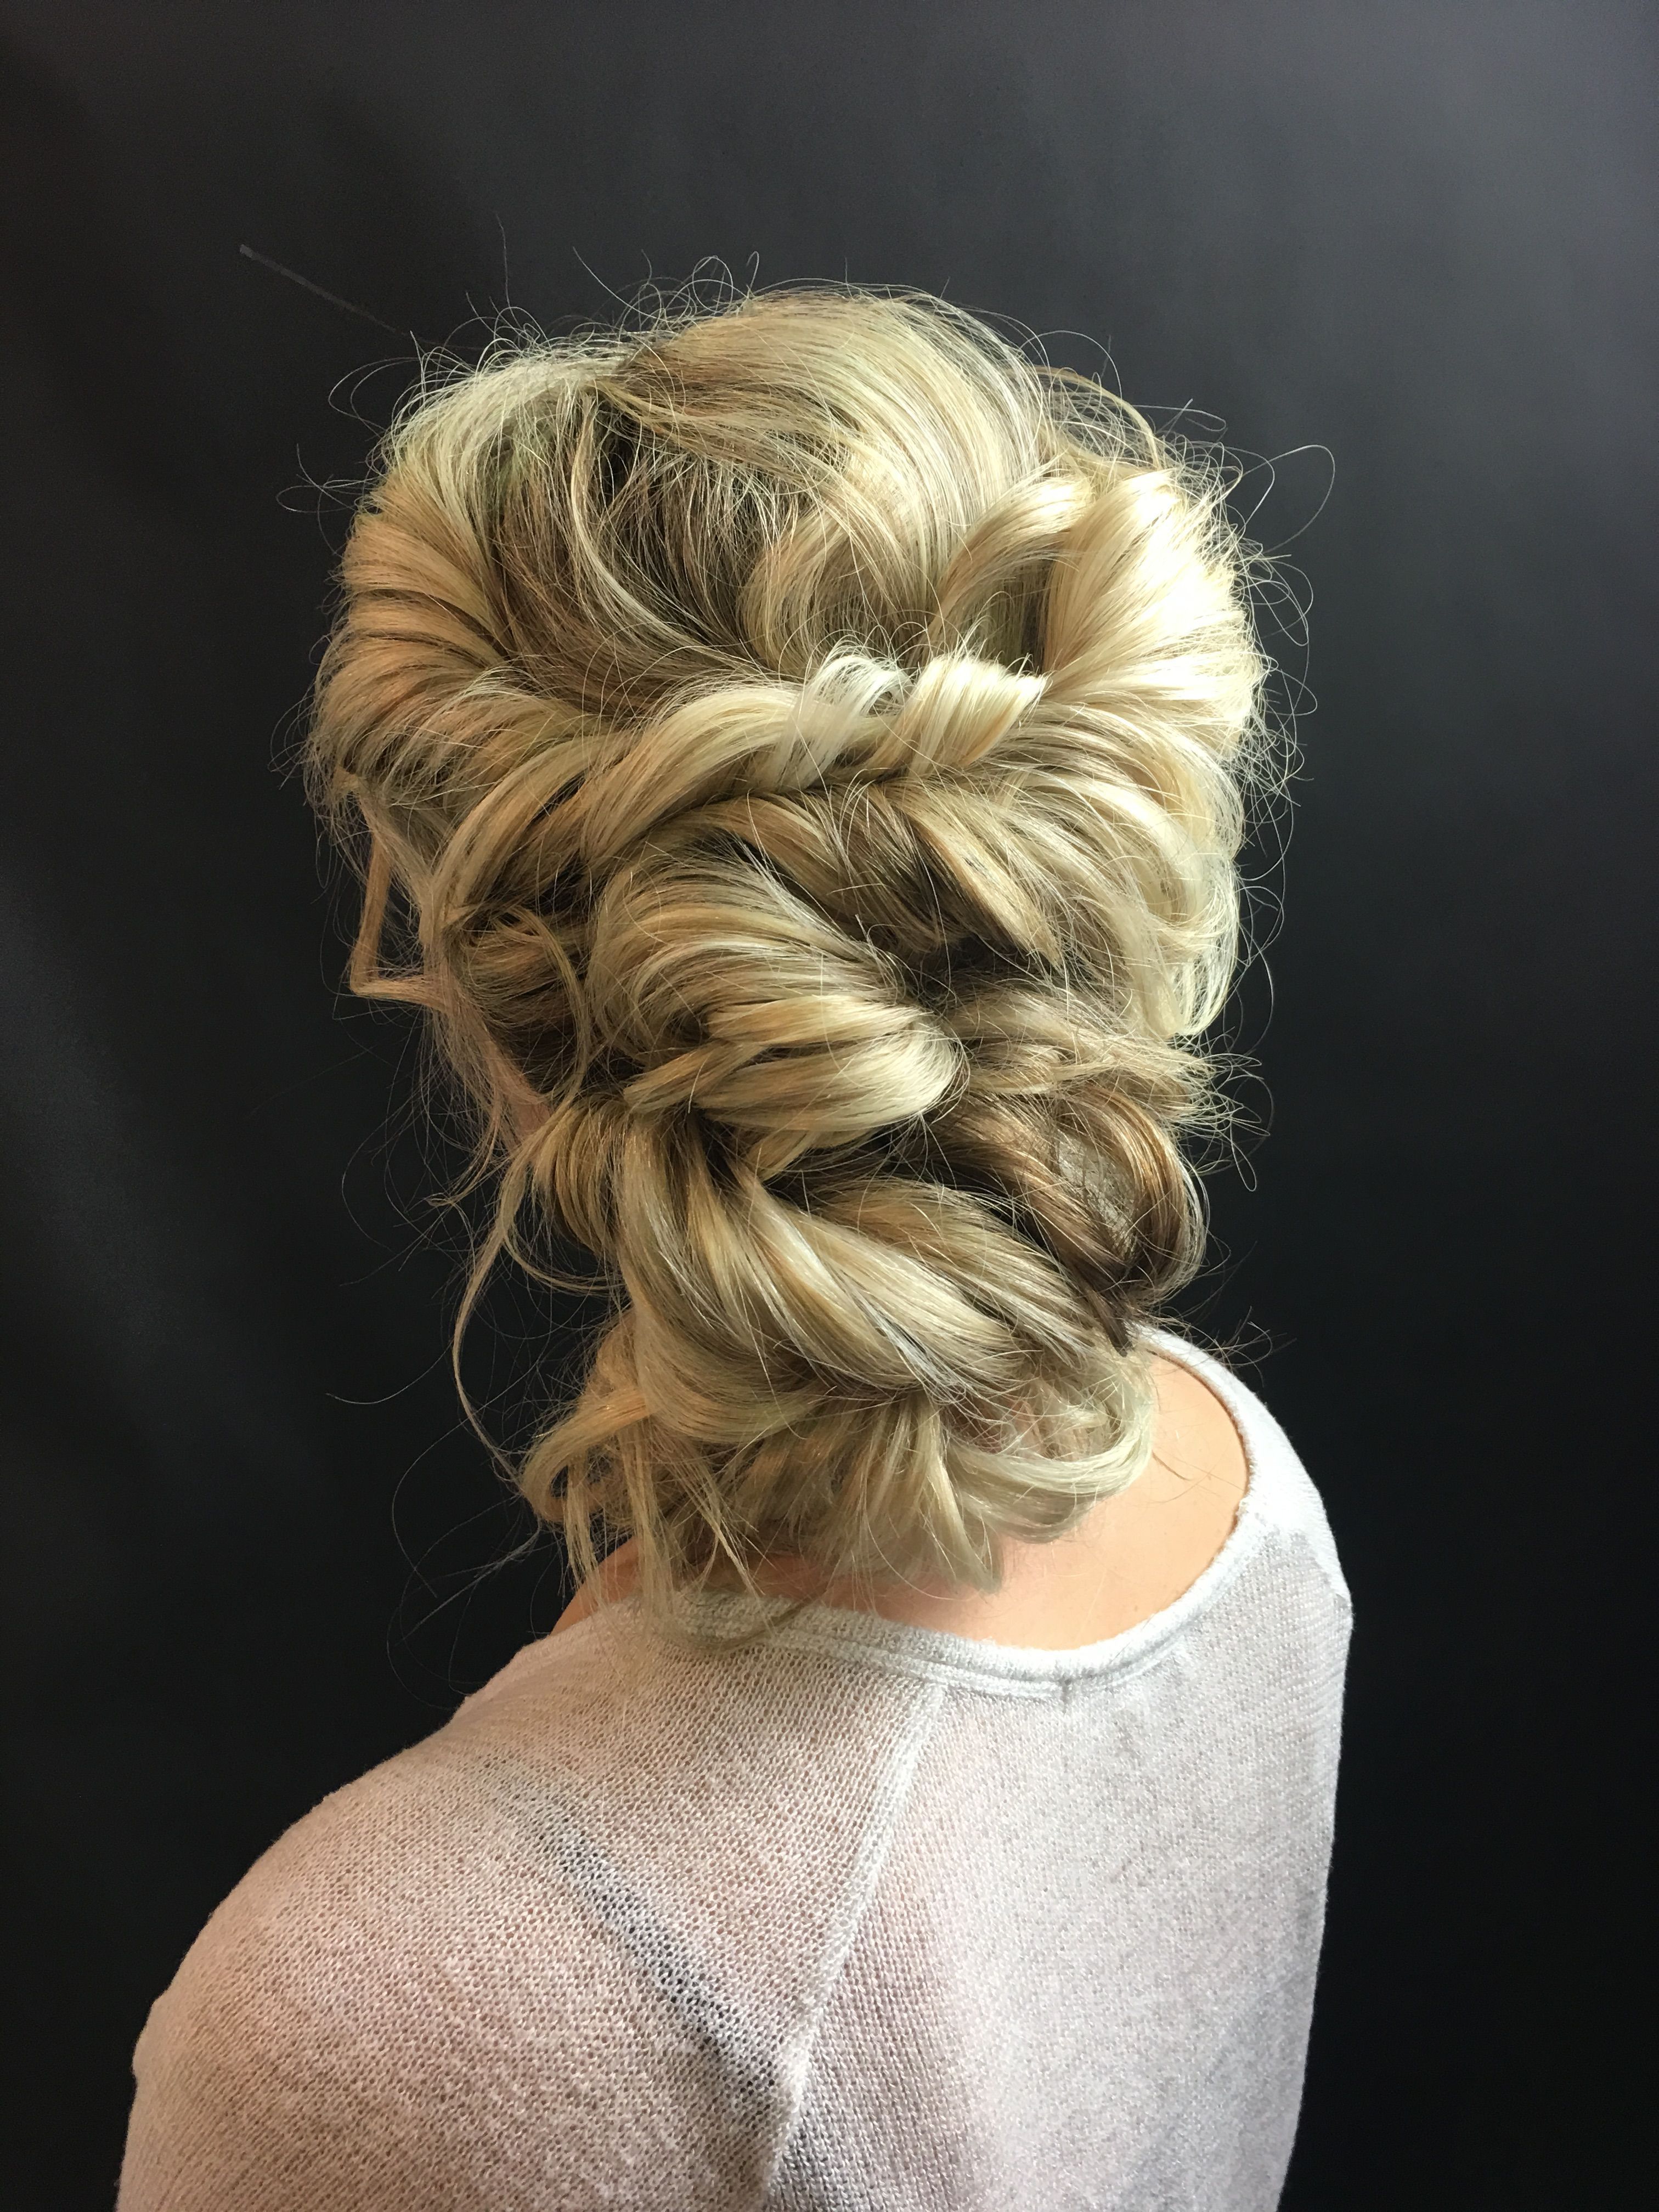 Most Recent Twisted Low Bun Hairstyles For Prom Within Hairstyles : Hair Twisted Updo Bun Low Wedding Style Plus Hairstyles (View 19 of 20)